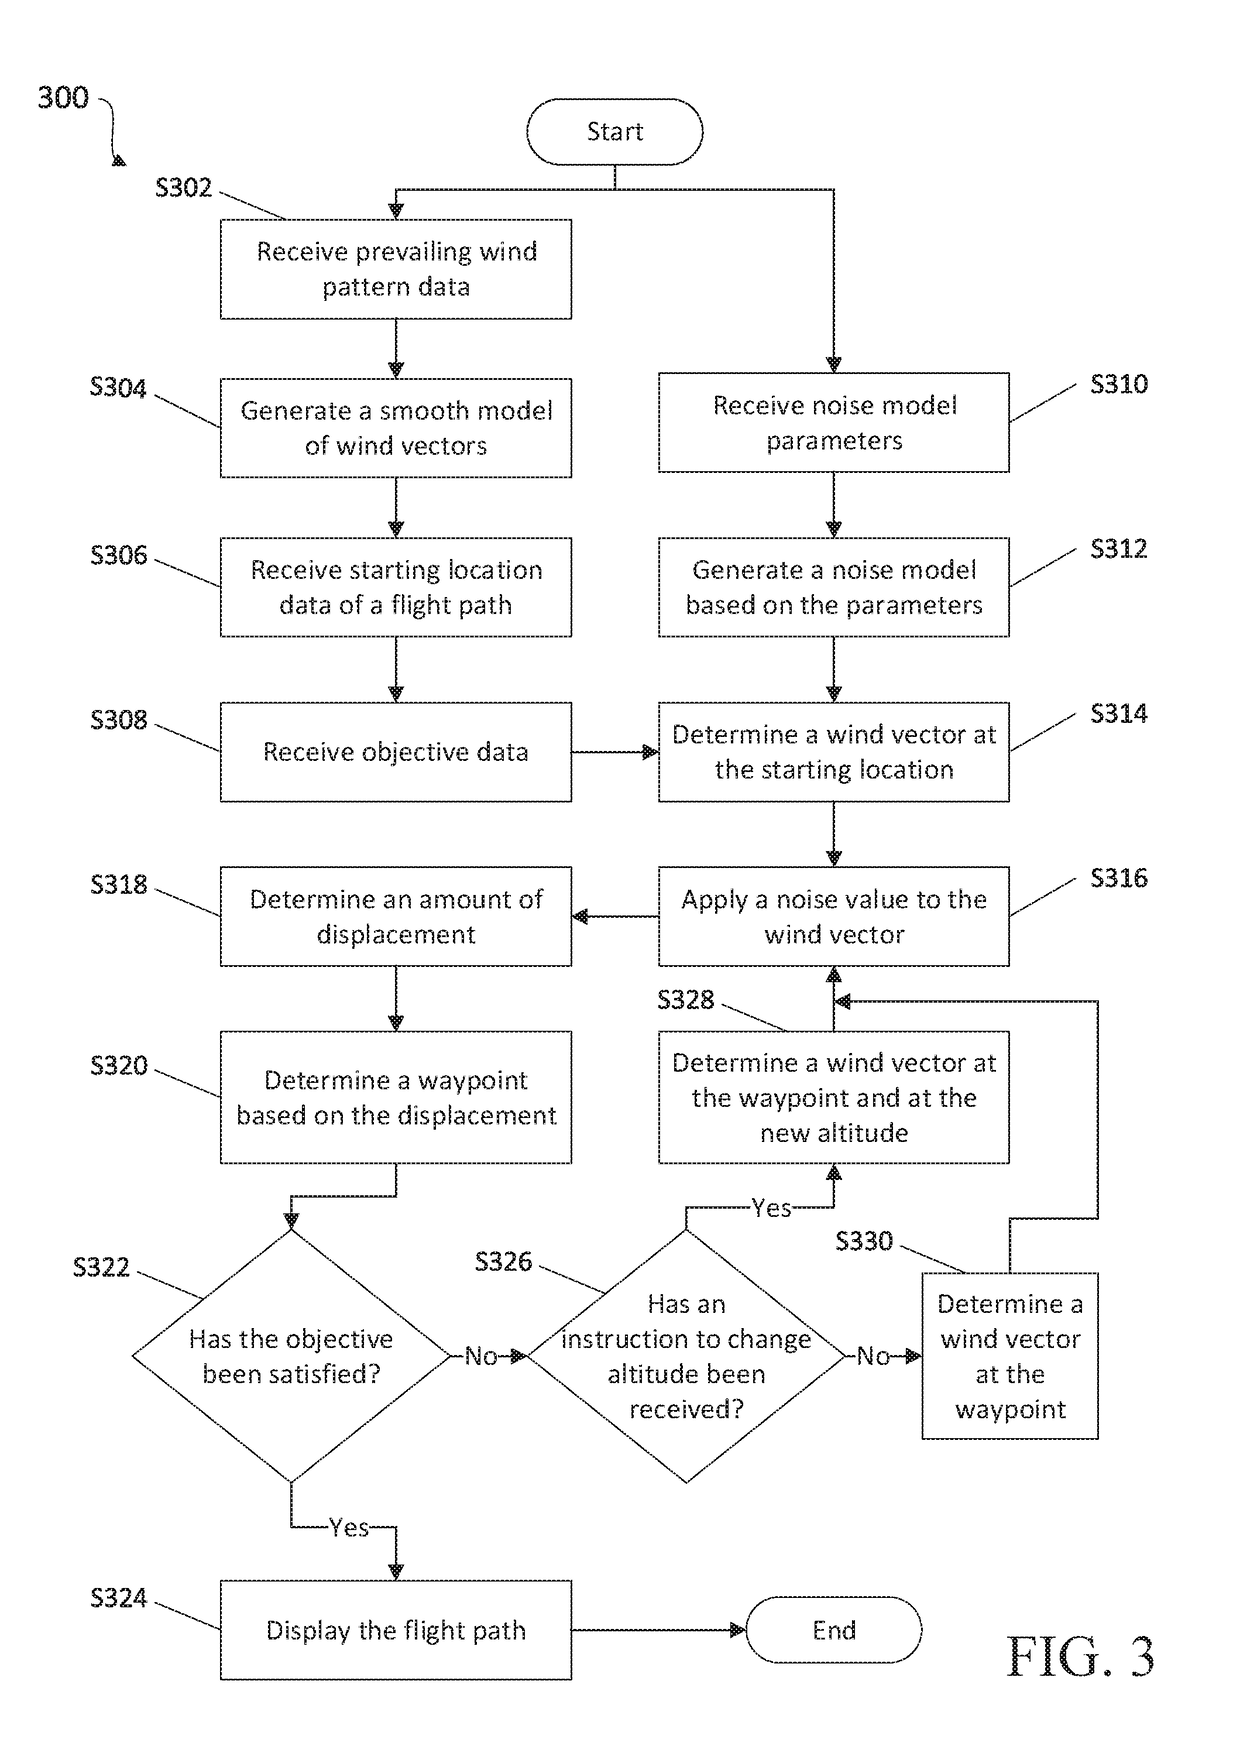 Systems and methods for simulating wind noise models